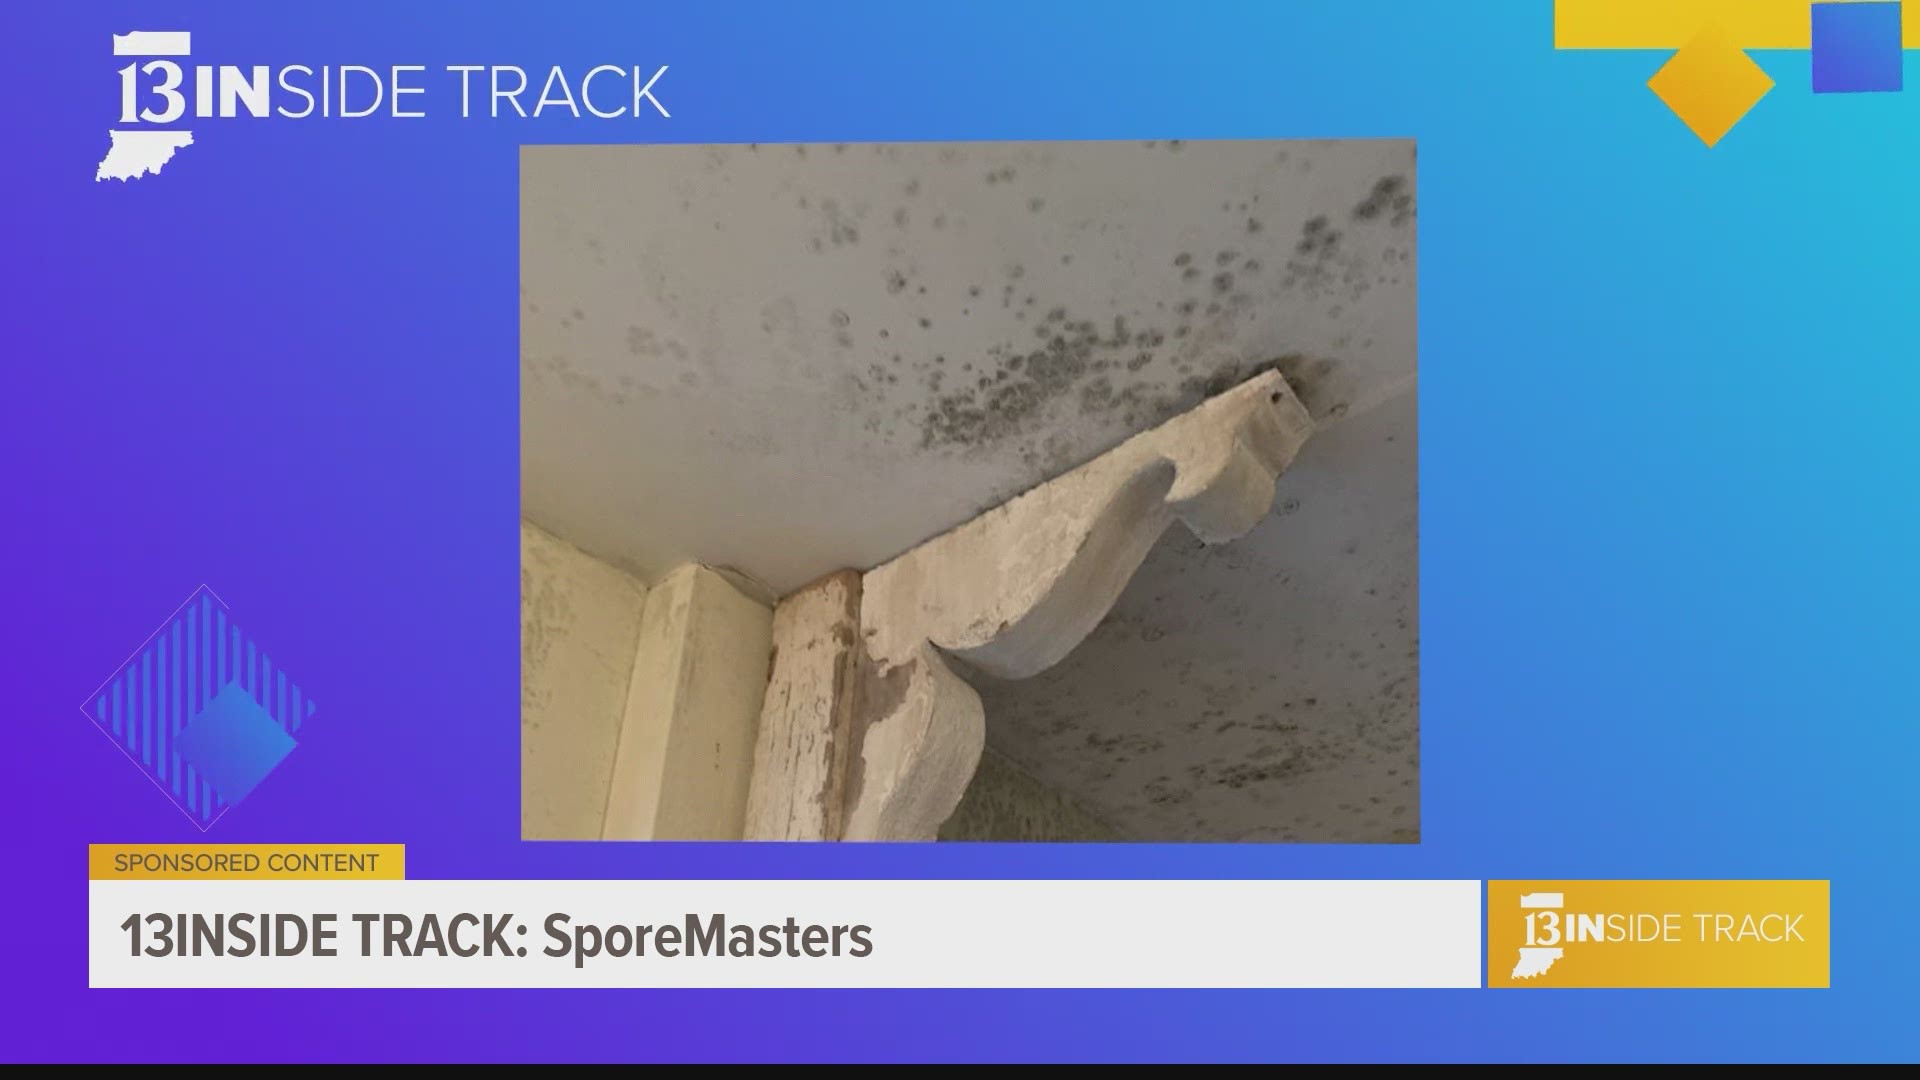 Sporemasters offers mold clean-up as well as viral clean-up.